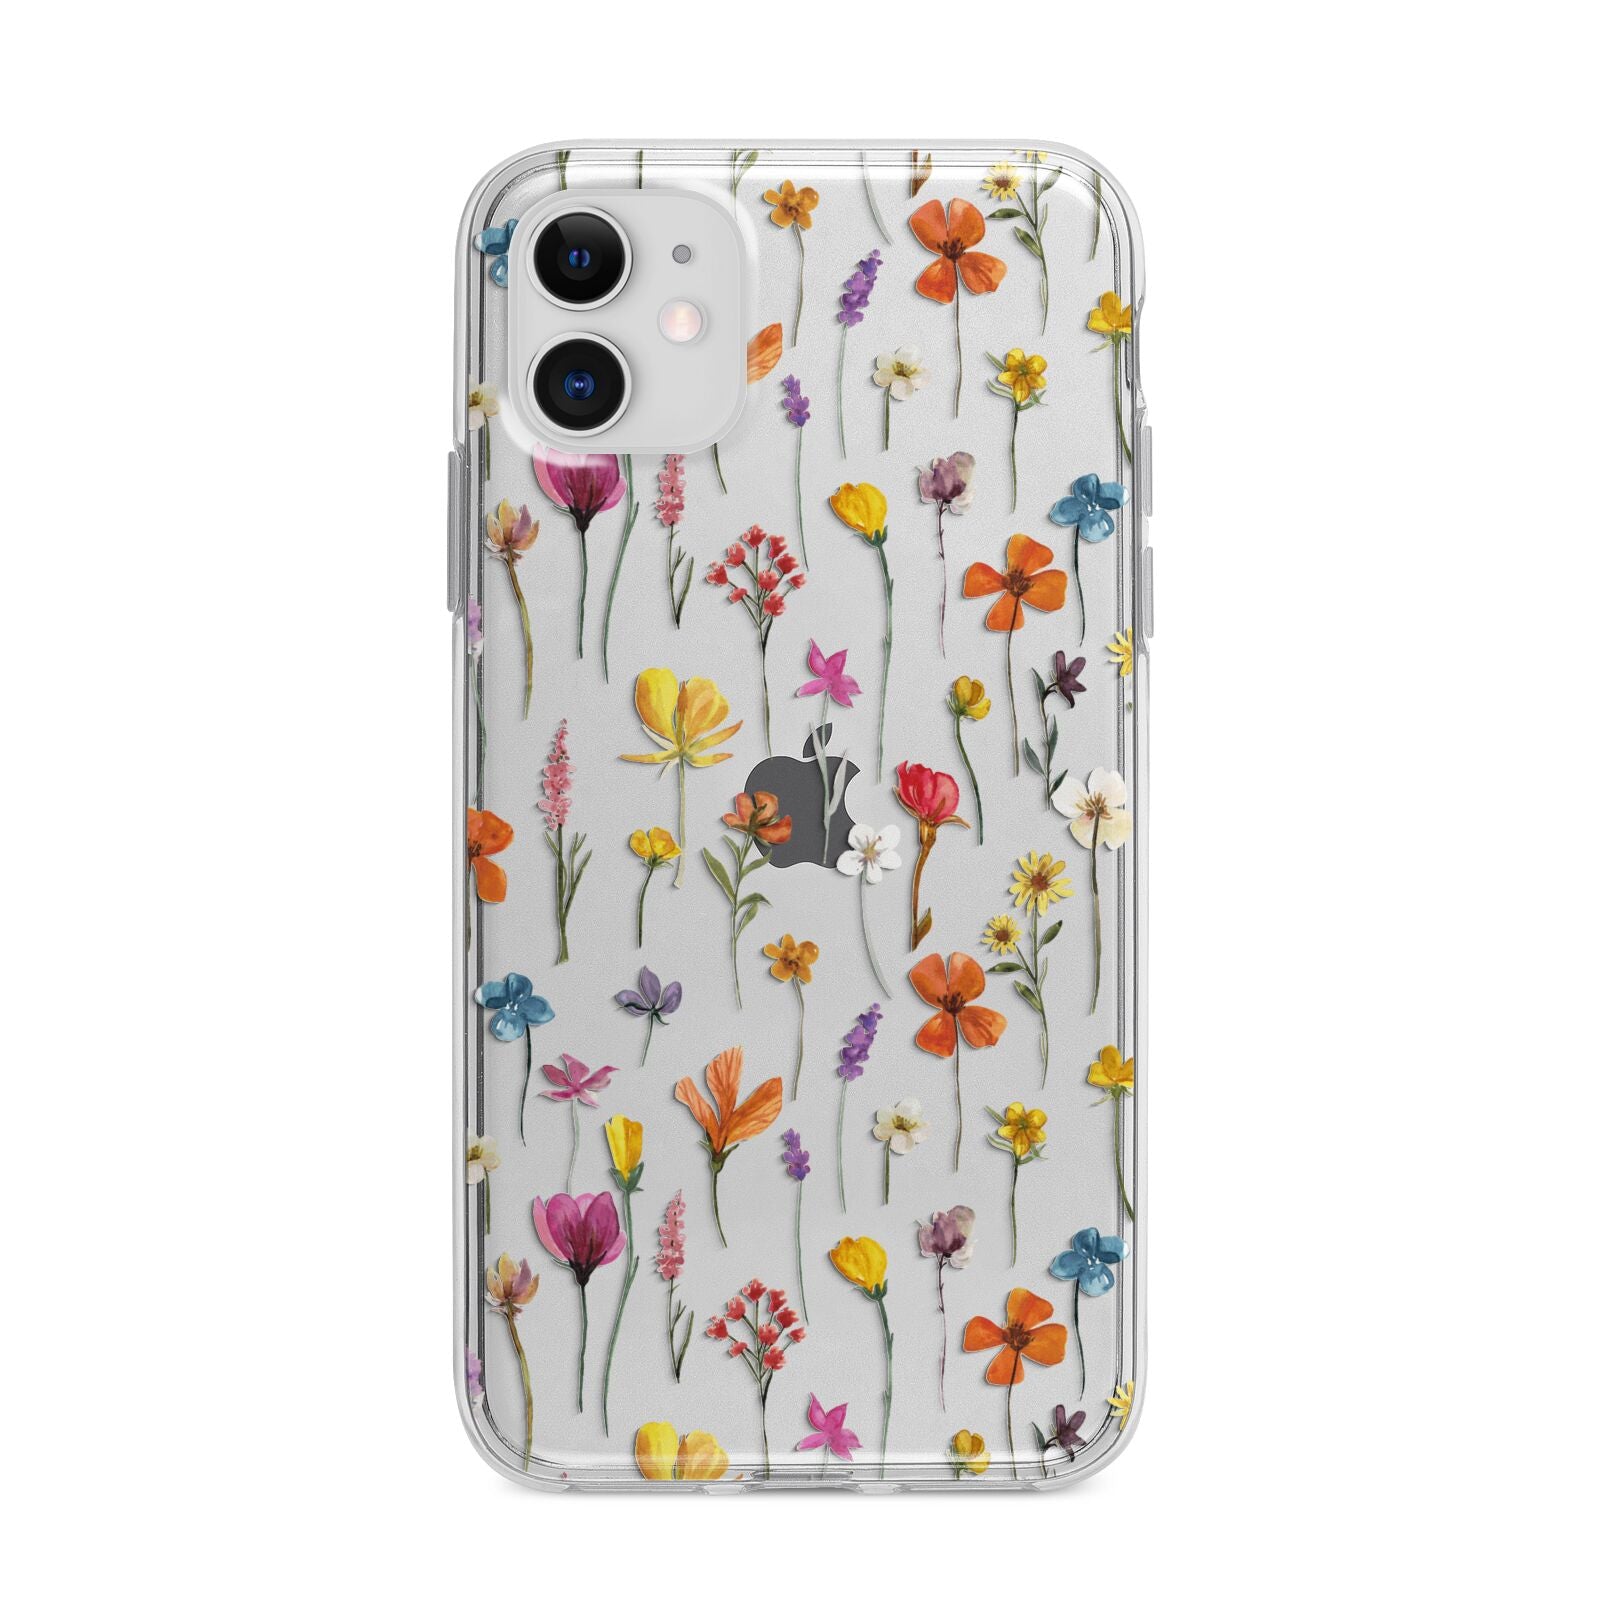 Botanical Floral Apple iPhone 11 in White with Bumper Case